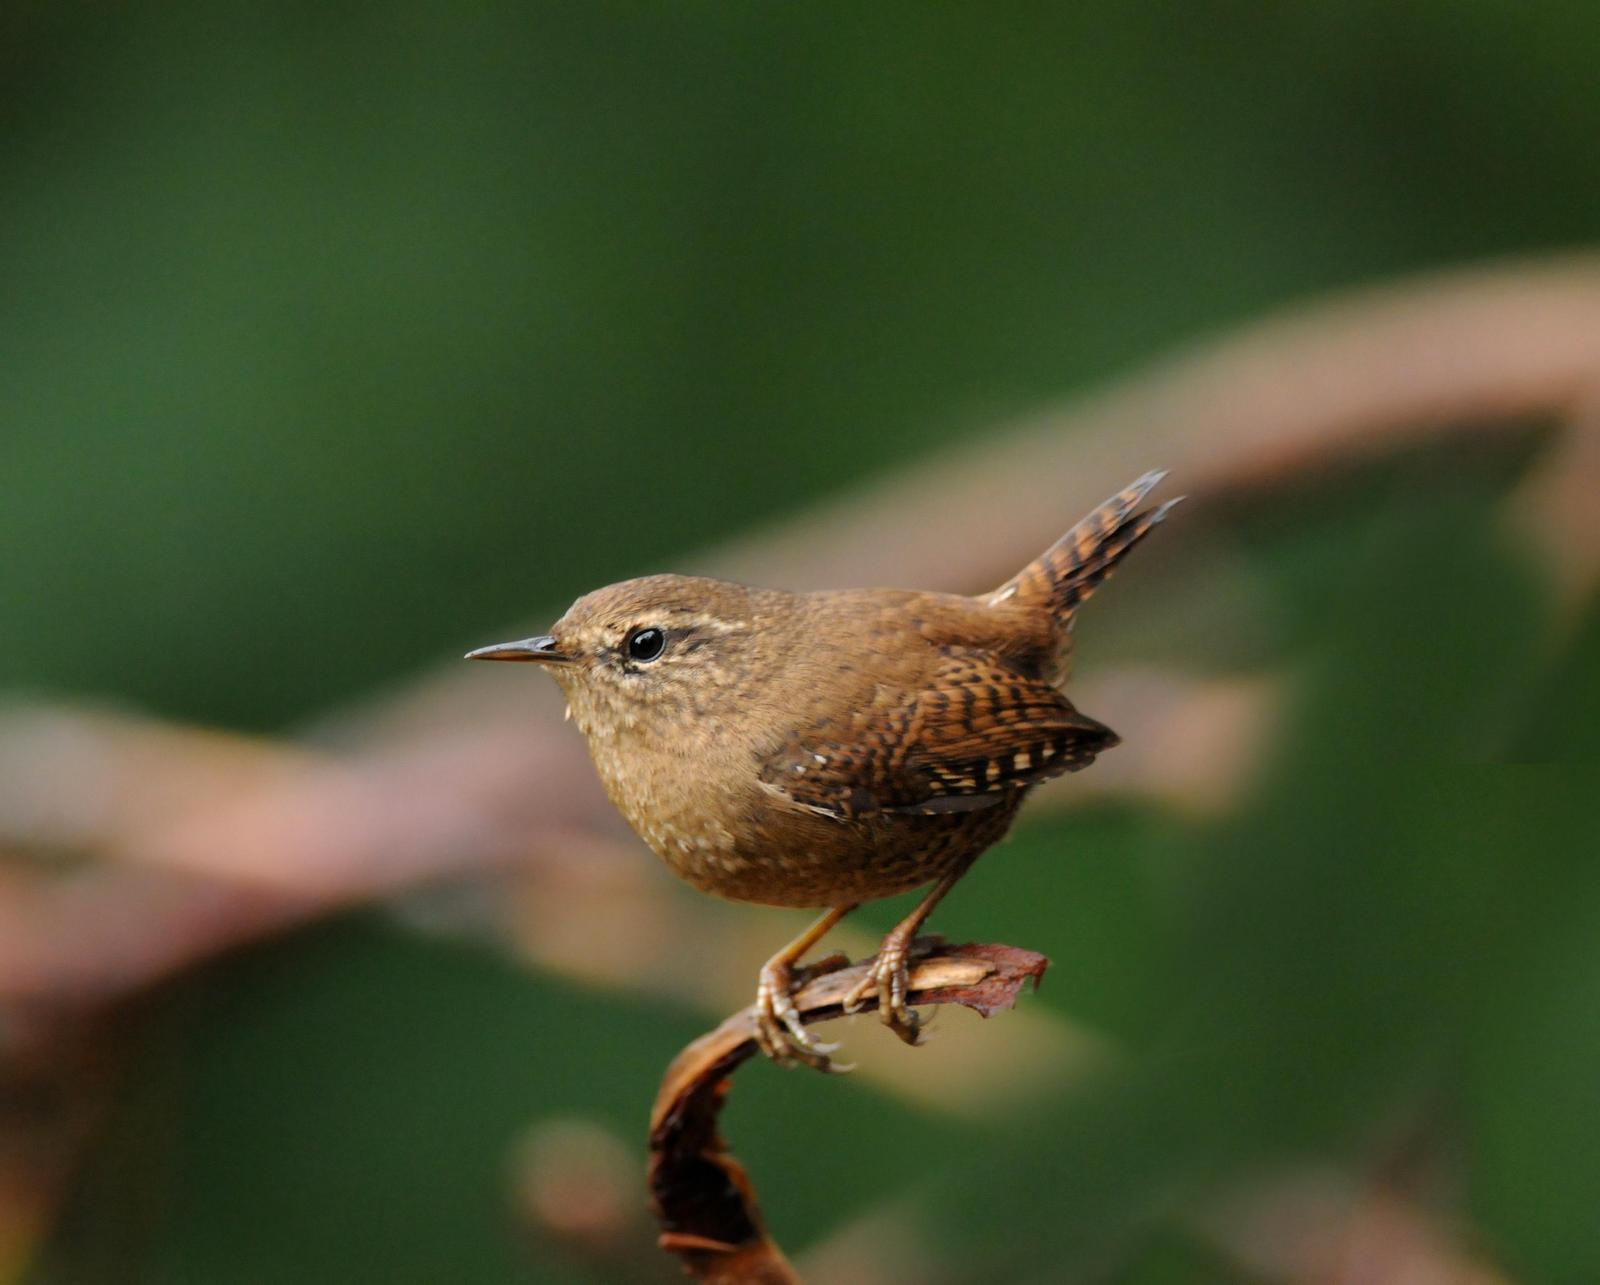 Pacific Wren (pacificus Group) Photo by Steven Mlodinow